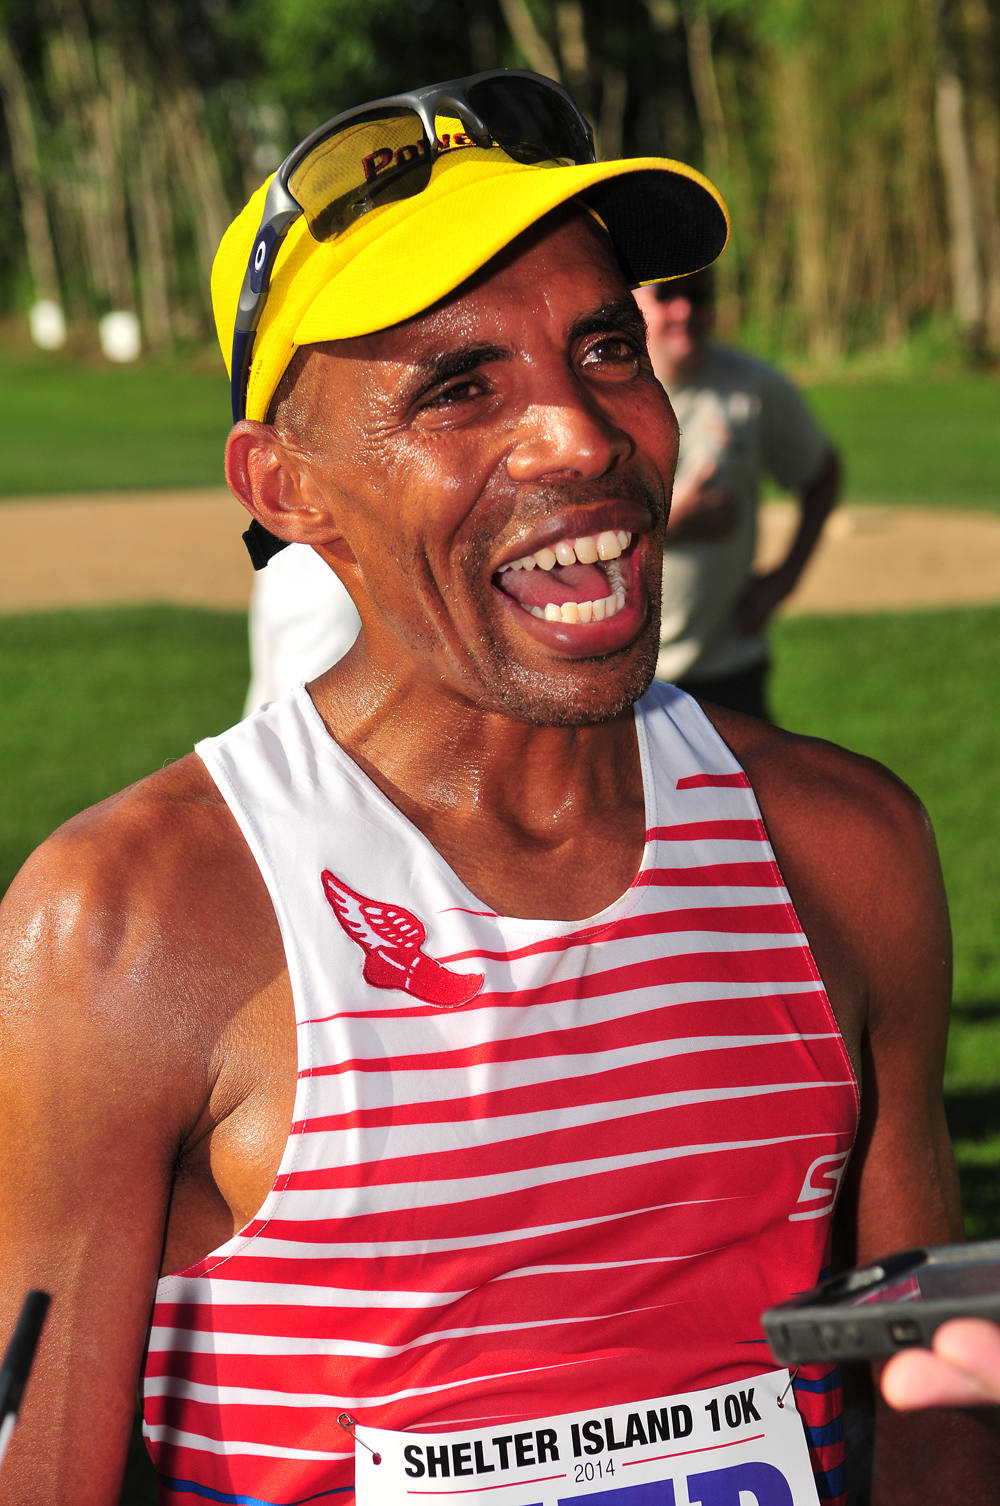 Boston Marathon winner Meb Keflezighi speaks with reporters after crossing the finish line fourth at the Shelter Island 10K Saturday.  (Credit: Bill Landon)